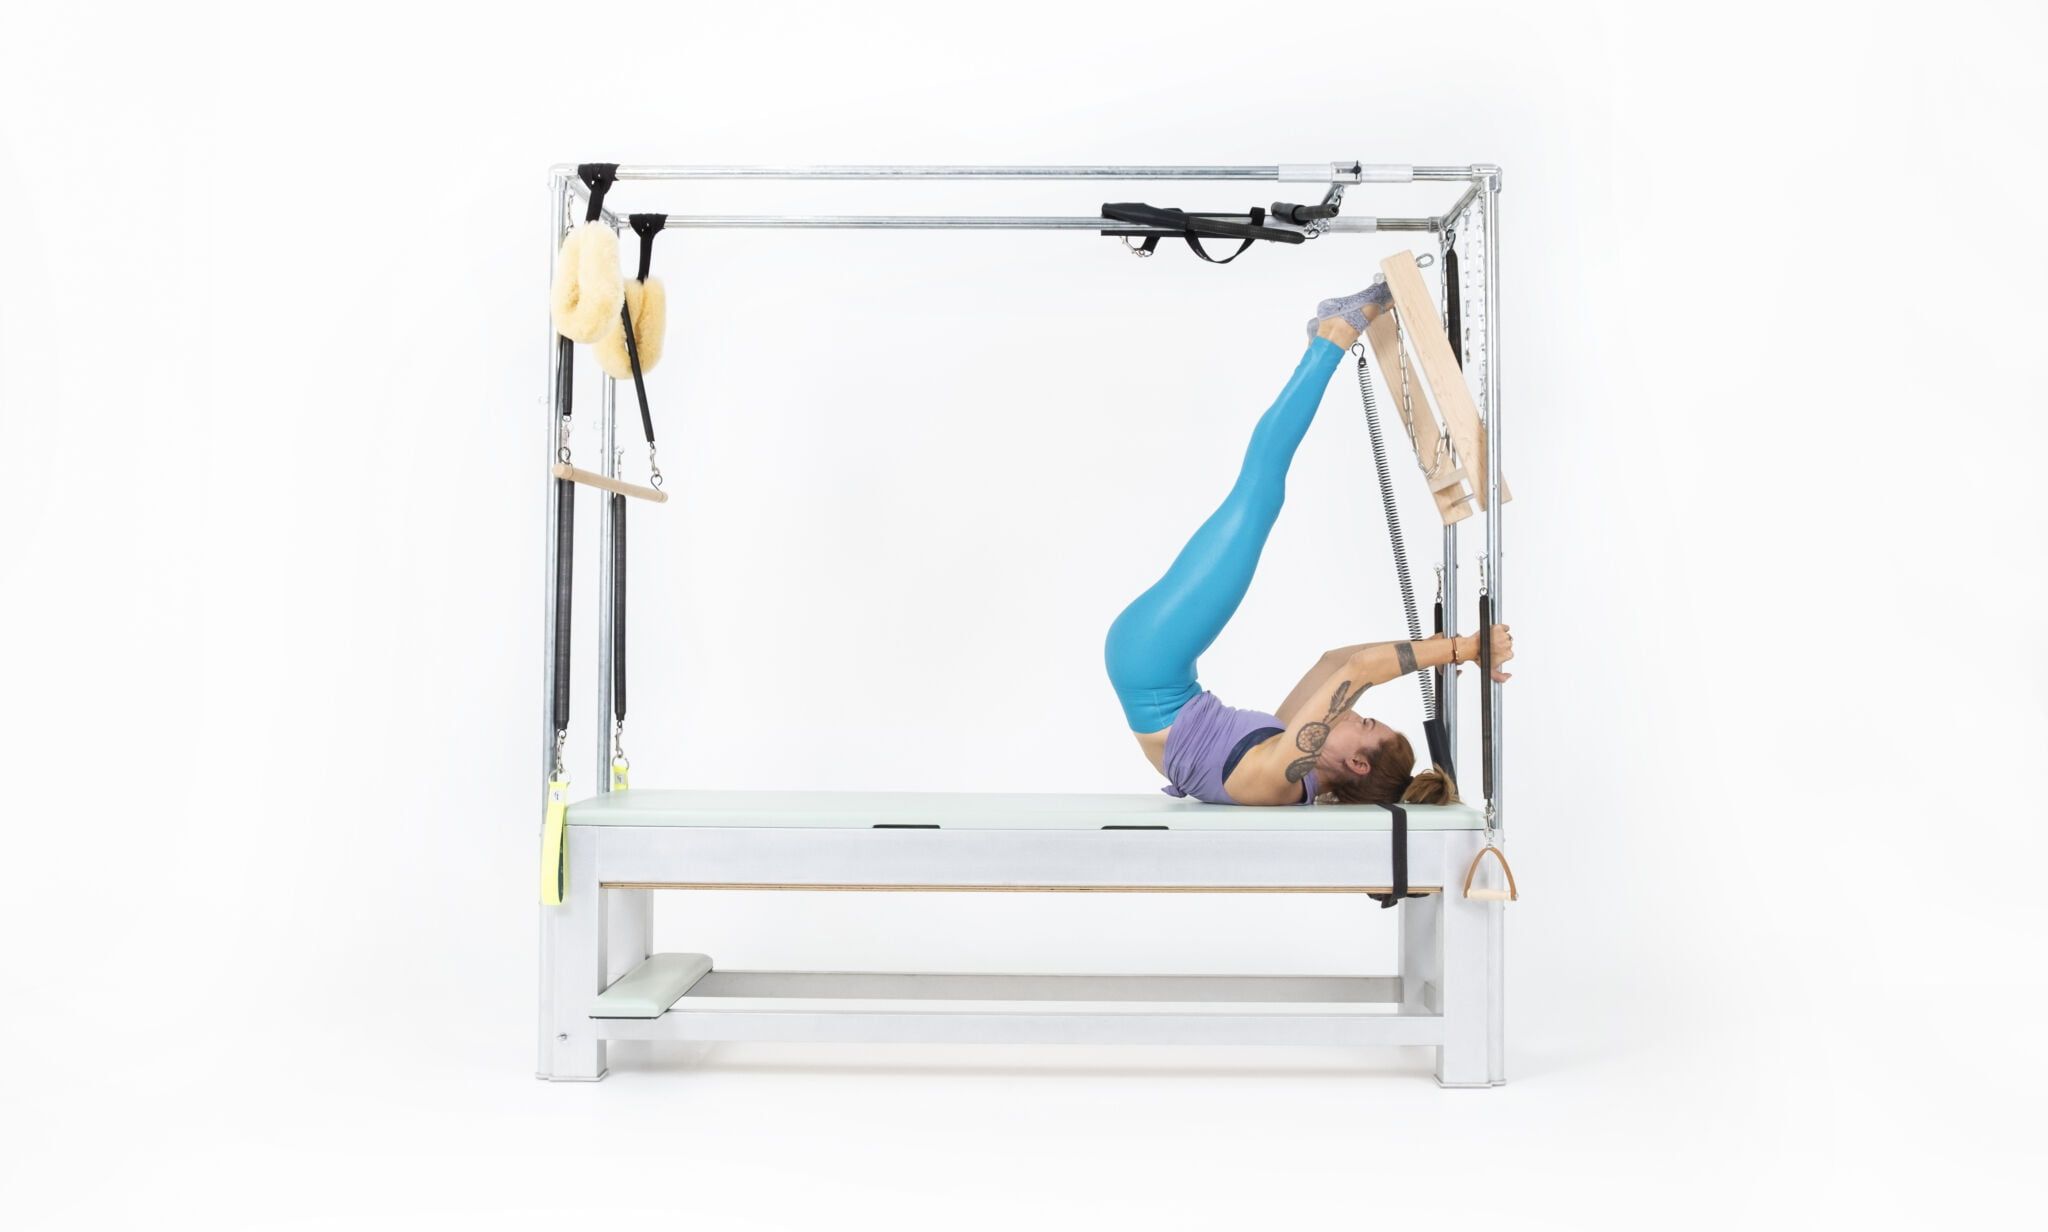 Is the Pilates Cadillac just a souped-up version of the Pilates Tower? -  Rivercity Pilates